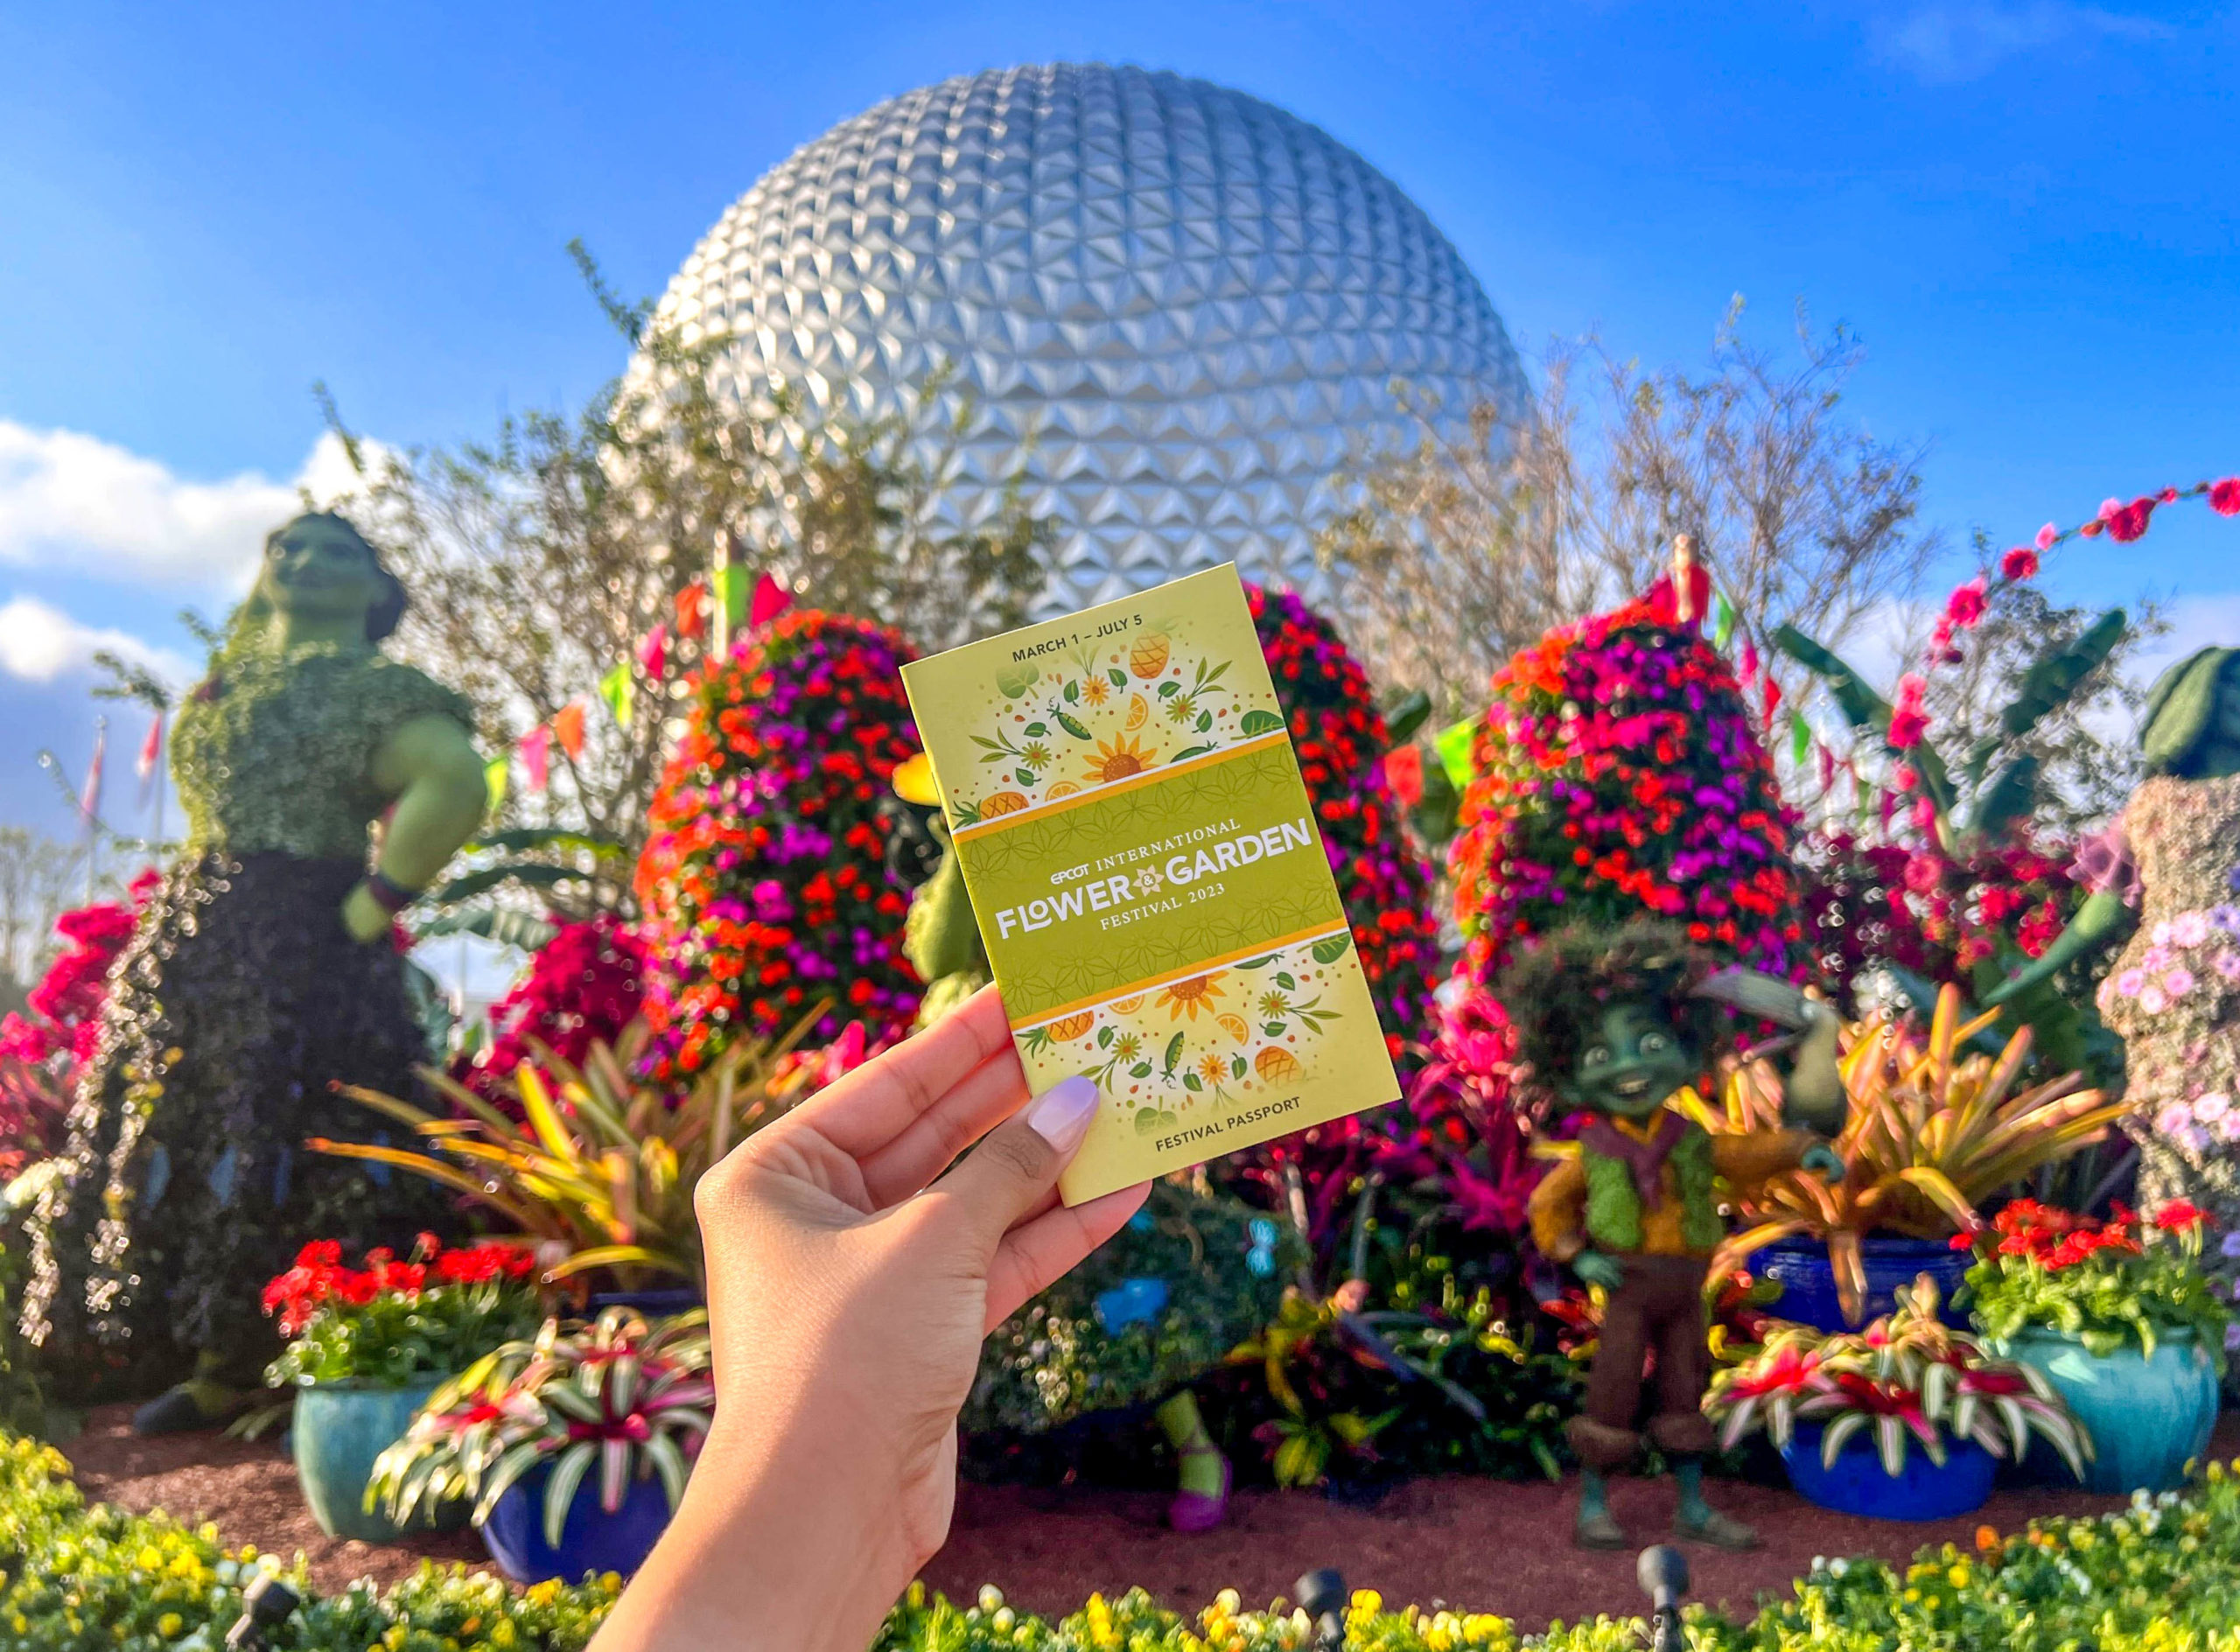 NEW MagicBand+ Released For the 2023 EPCOT Flower & Garden Festival